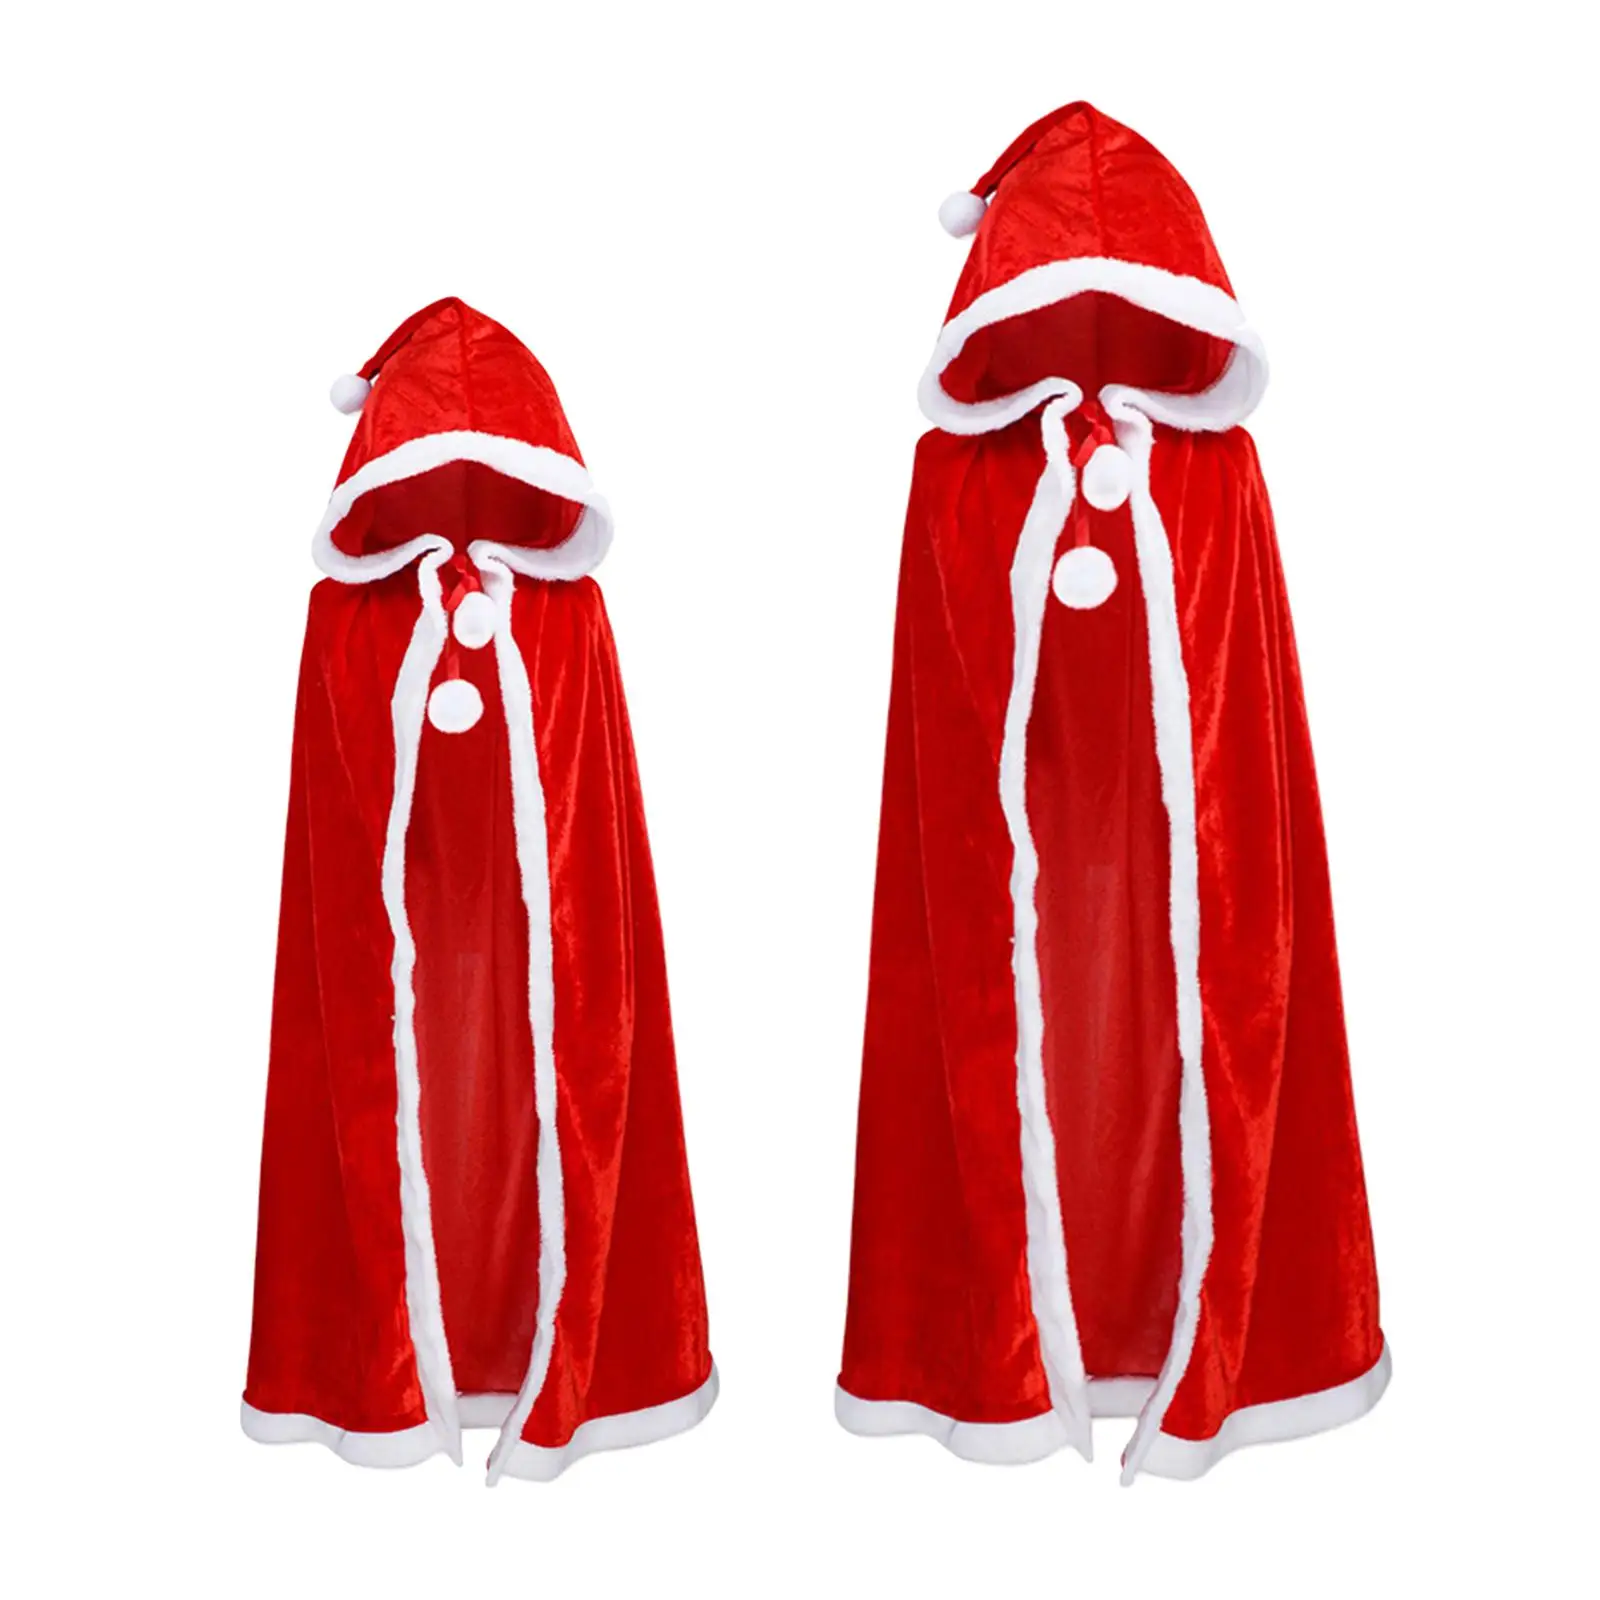 

Halloween Christmas Costume Cloak Dress up Durable Roles Play Red Cape for Holidays Masquerade Party Supplies Carnival Festival